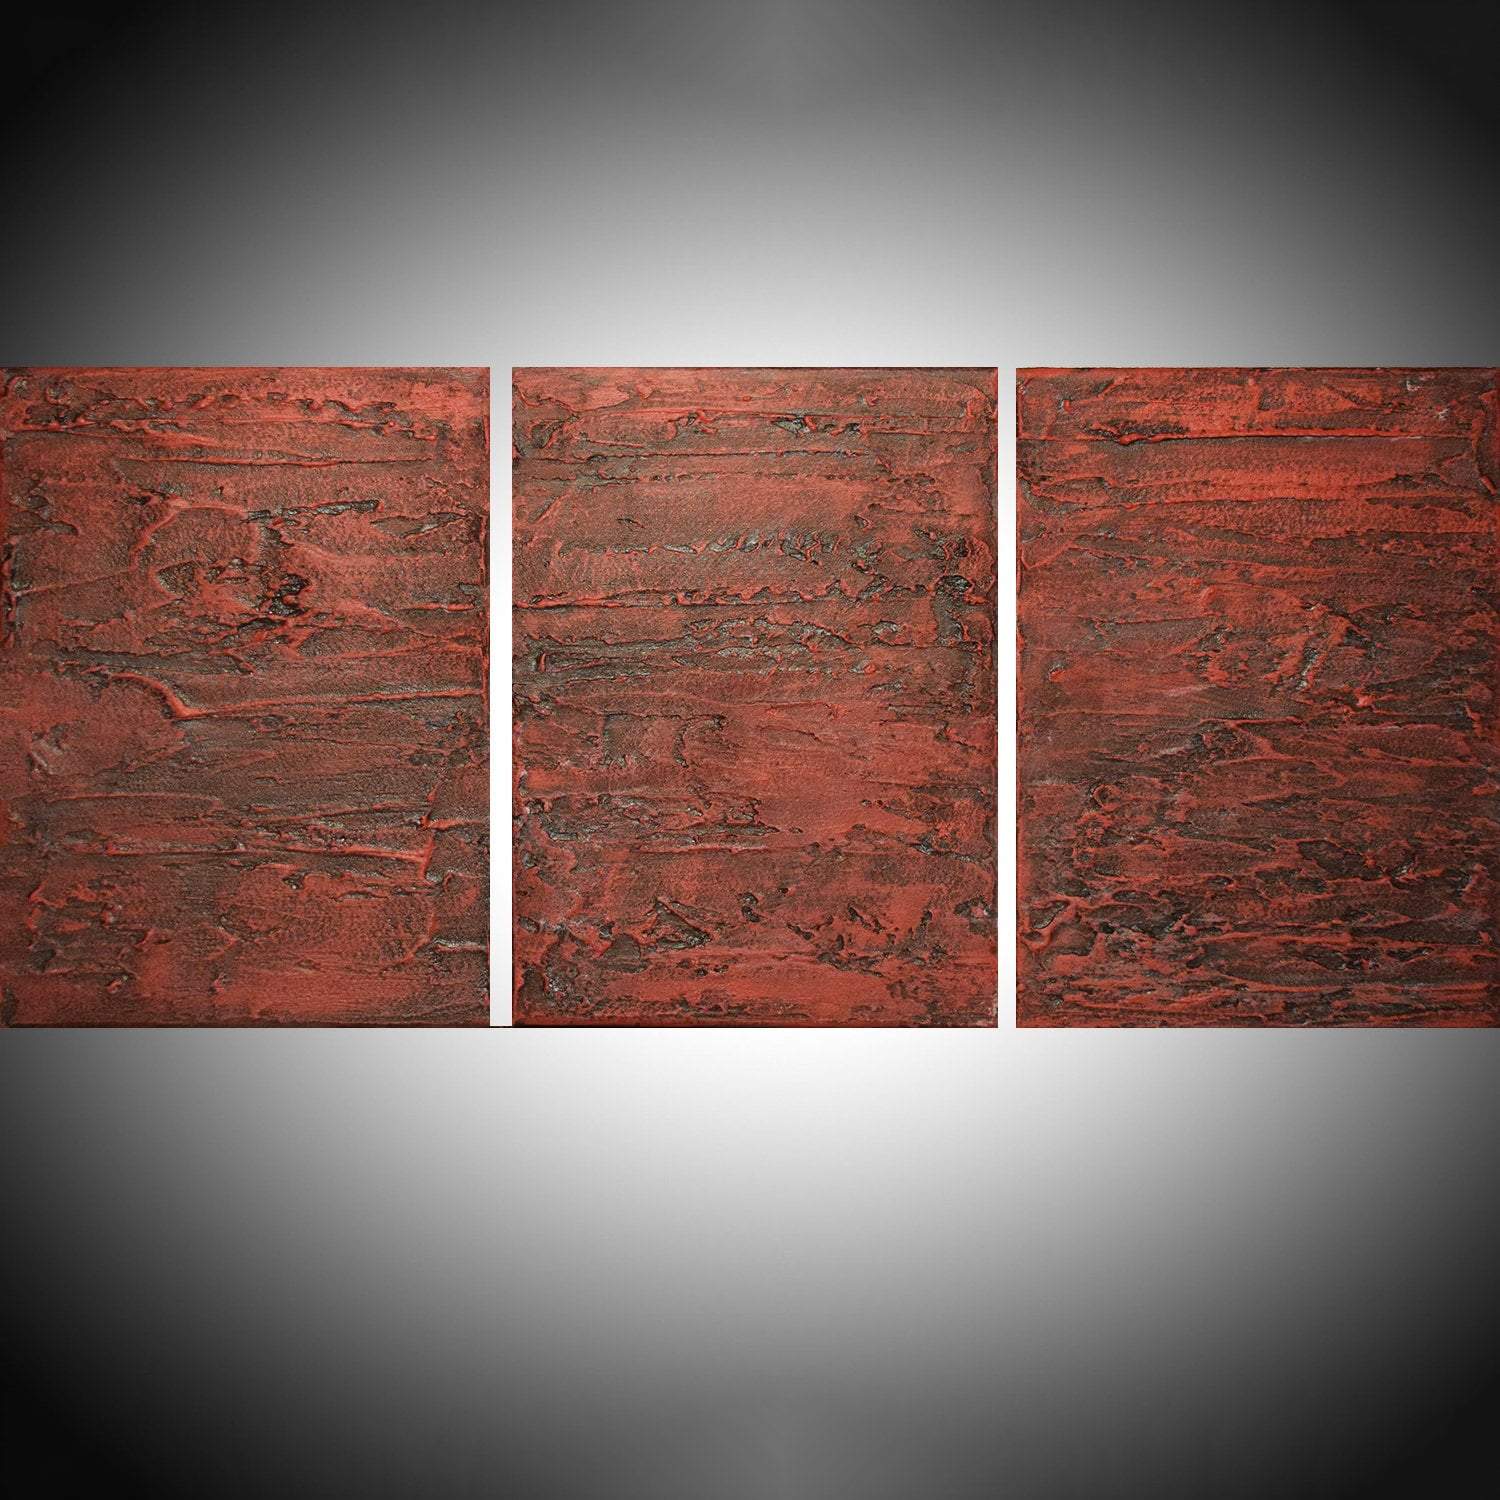 original triptych paintings for sale " Red Triptych " large triptych wall art